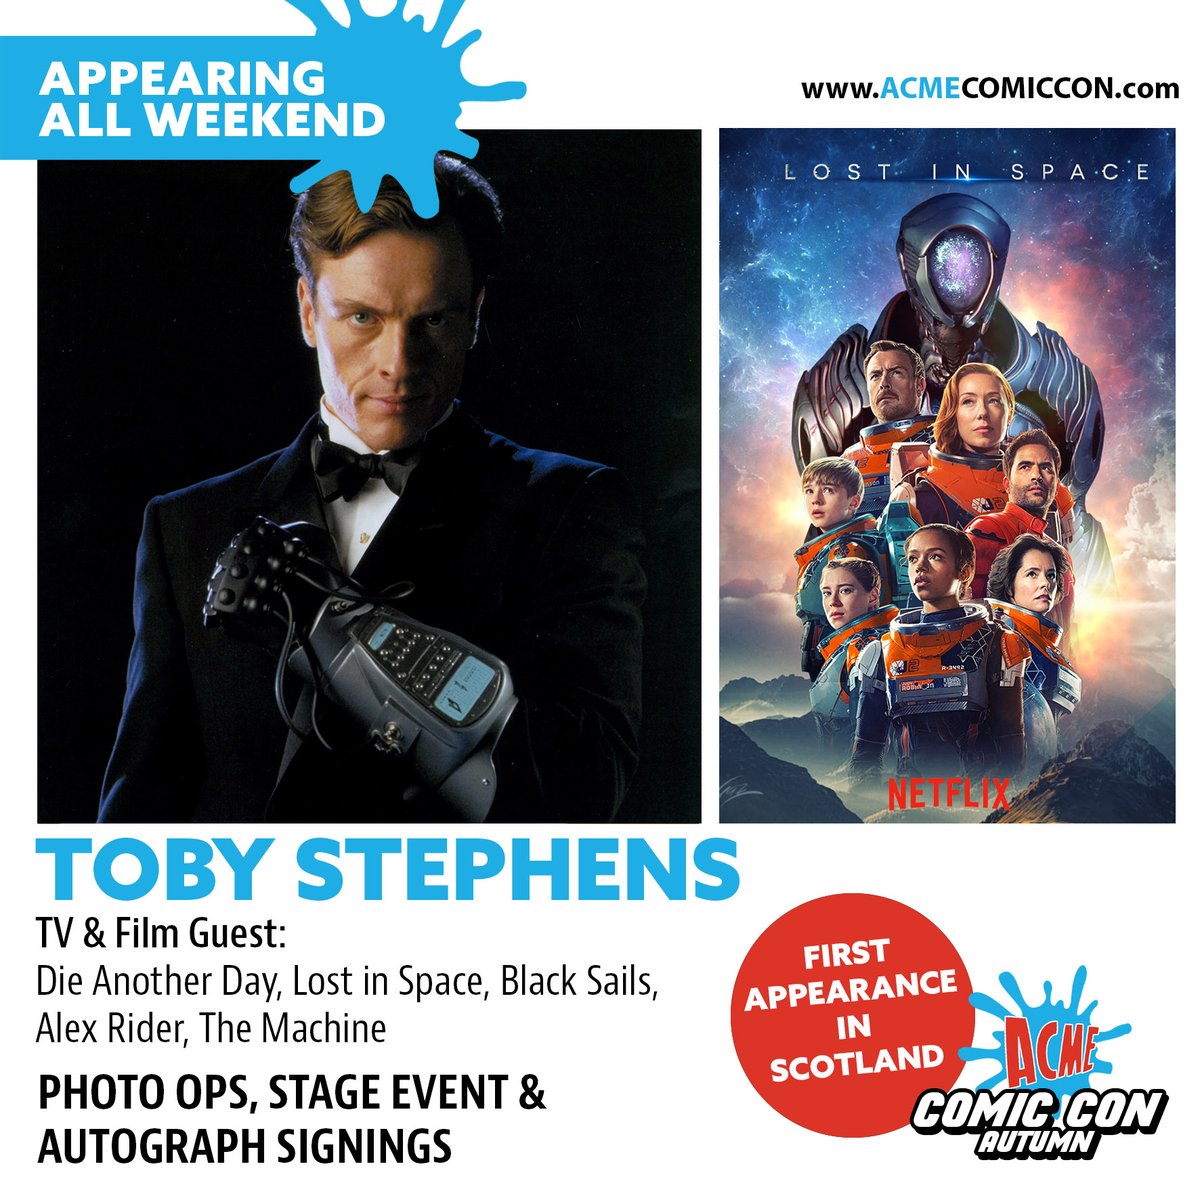 NEW MEDIA GUEST: Mr @TobyStephensInV 

⭐ Lost in Space
⭐ Black Sails
⭐ James Bond: Die Another Day
⭐ Alex Rider

Pre- sale photo-ops and autos are on sale now tinyurl.com/2996dt5u

#Tobystephens #Comiccon #ACMECOMICCON
#jamesbond #blacksails #alexrider #lostinspace  -